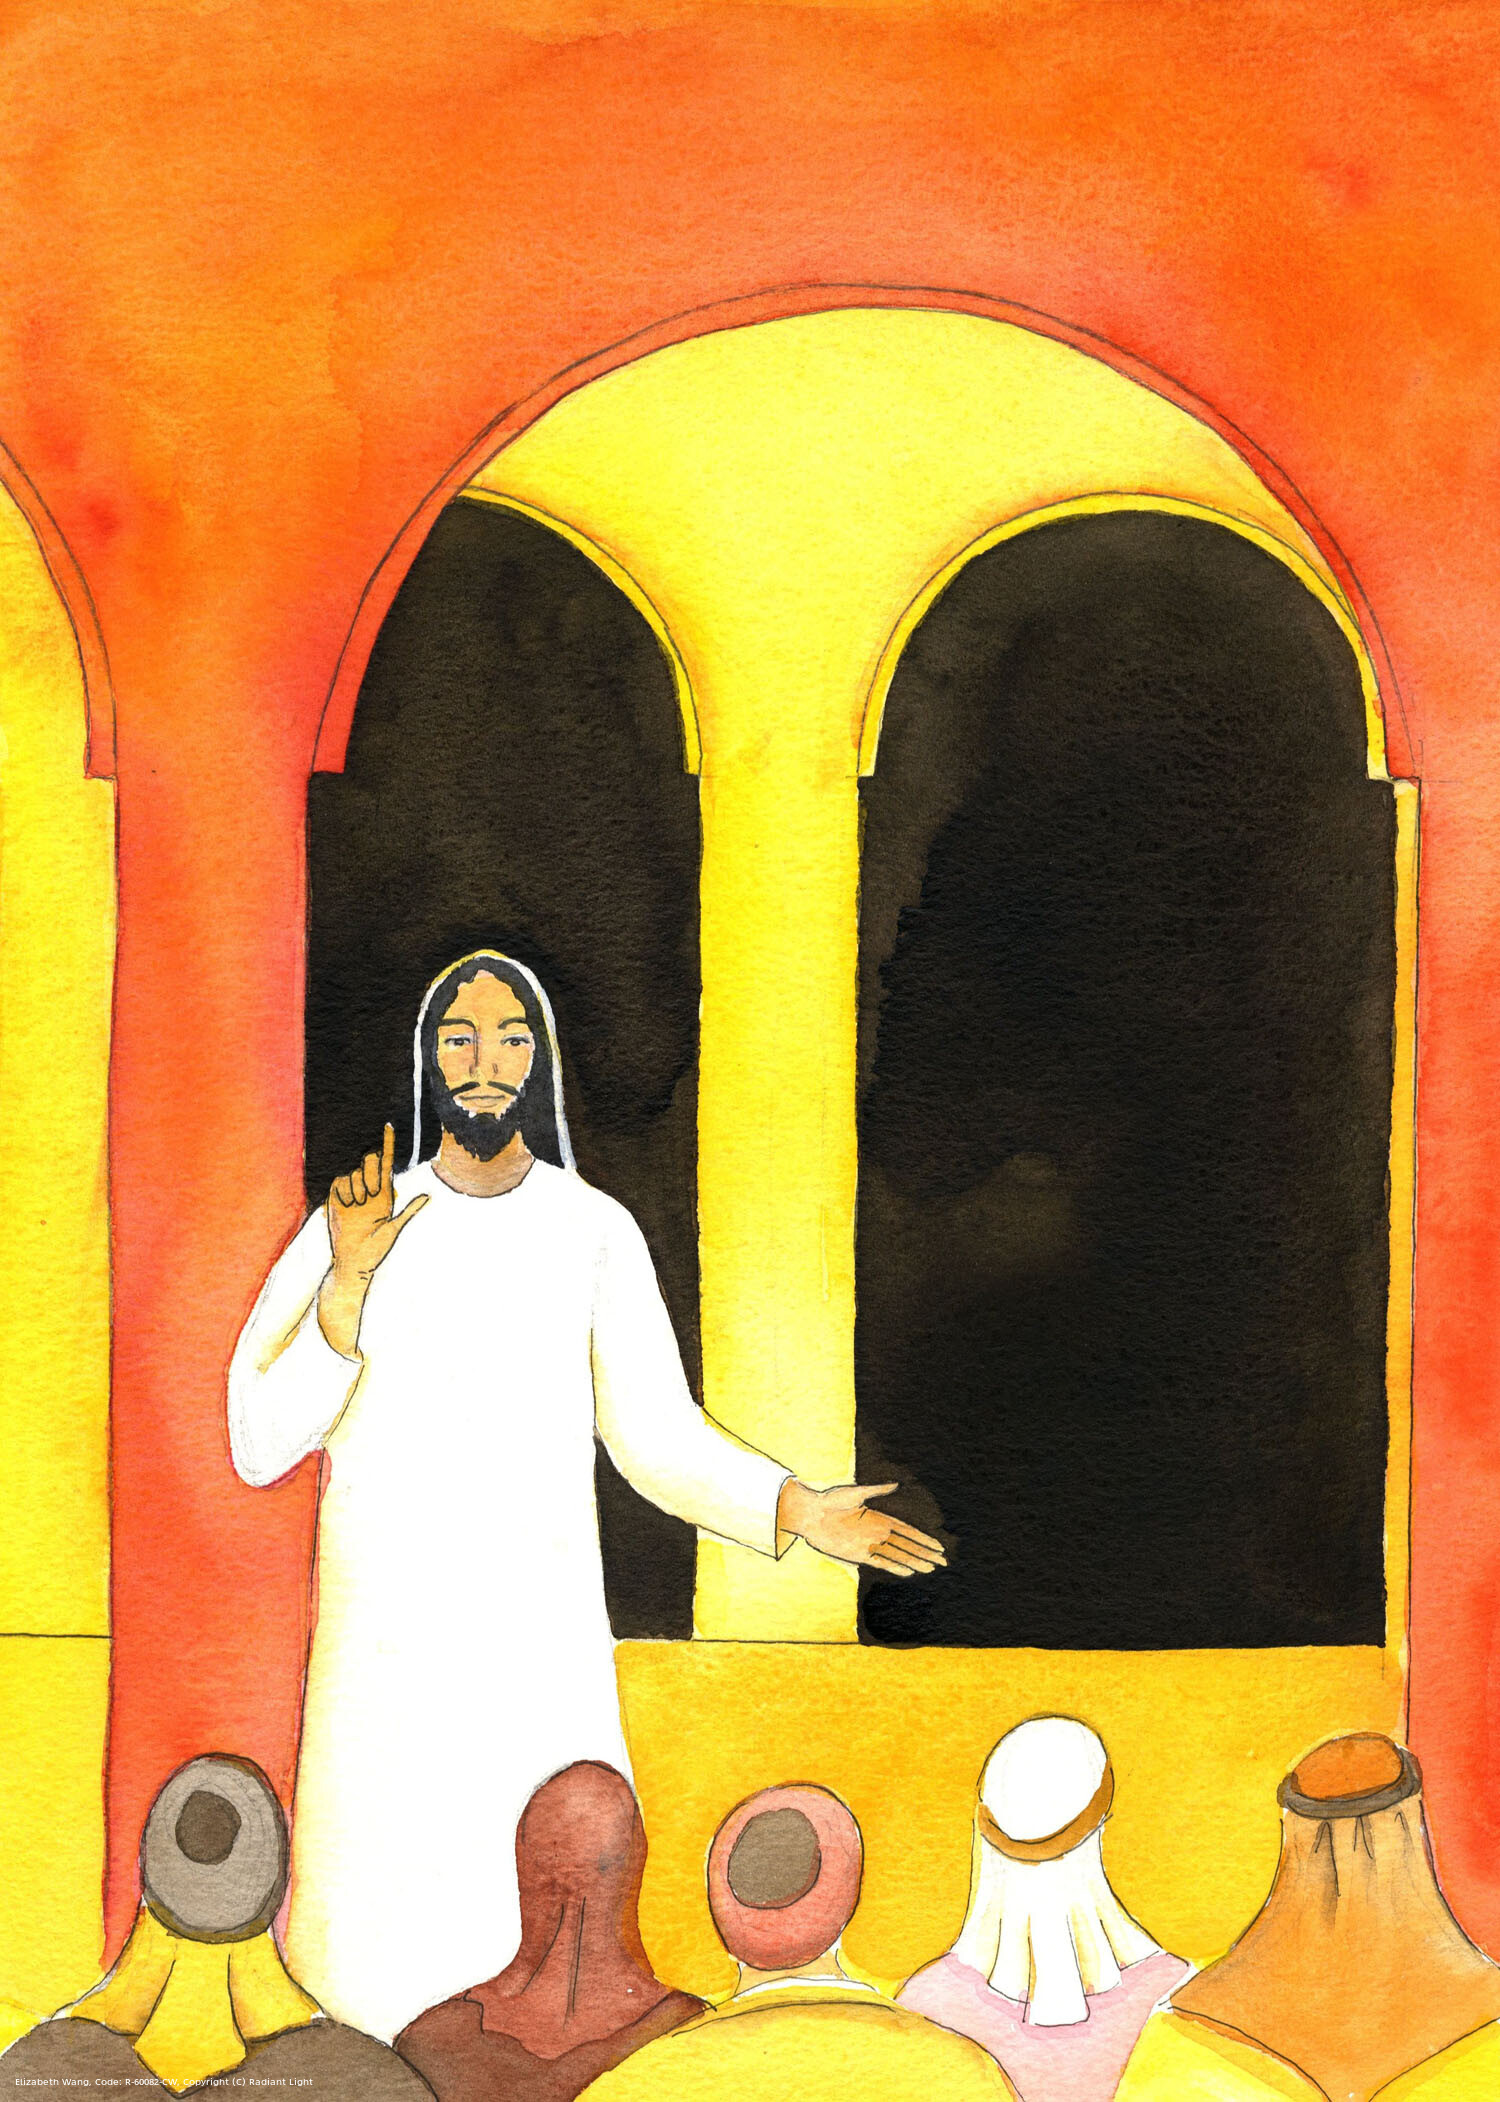 Jesus preached in the Temple, speaking the truth, and angering some people who then plotted to harm Him.